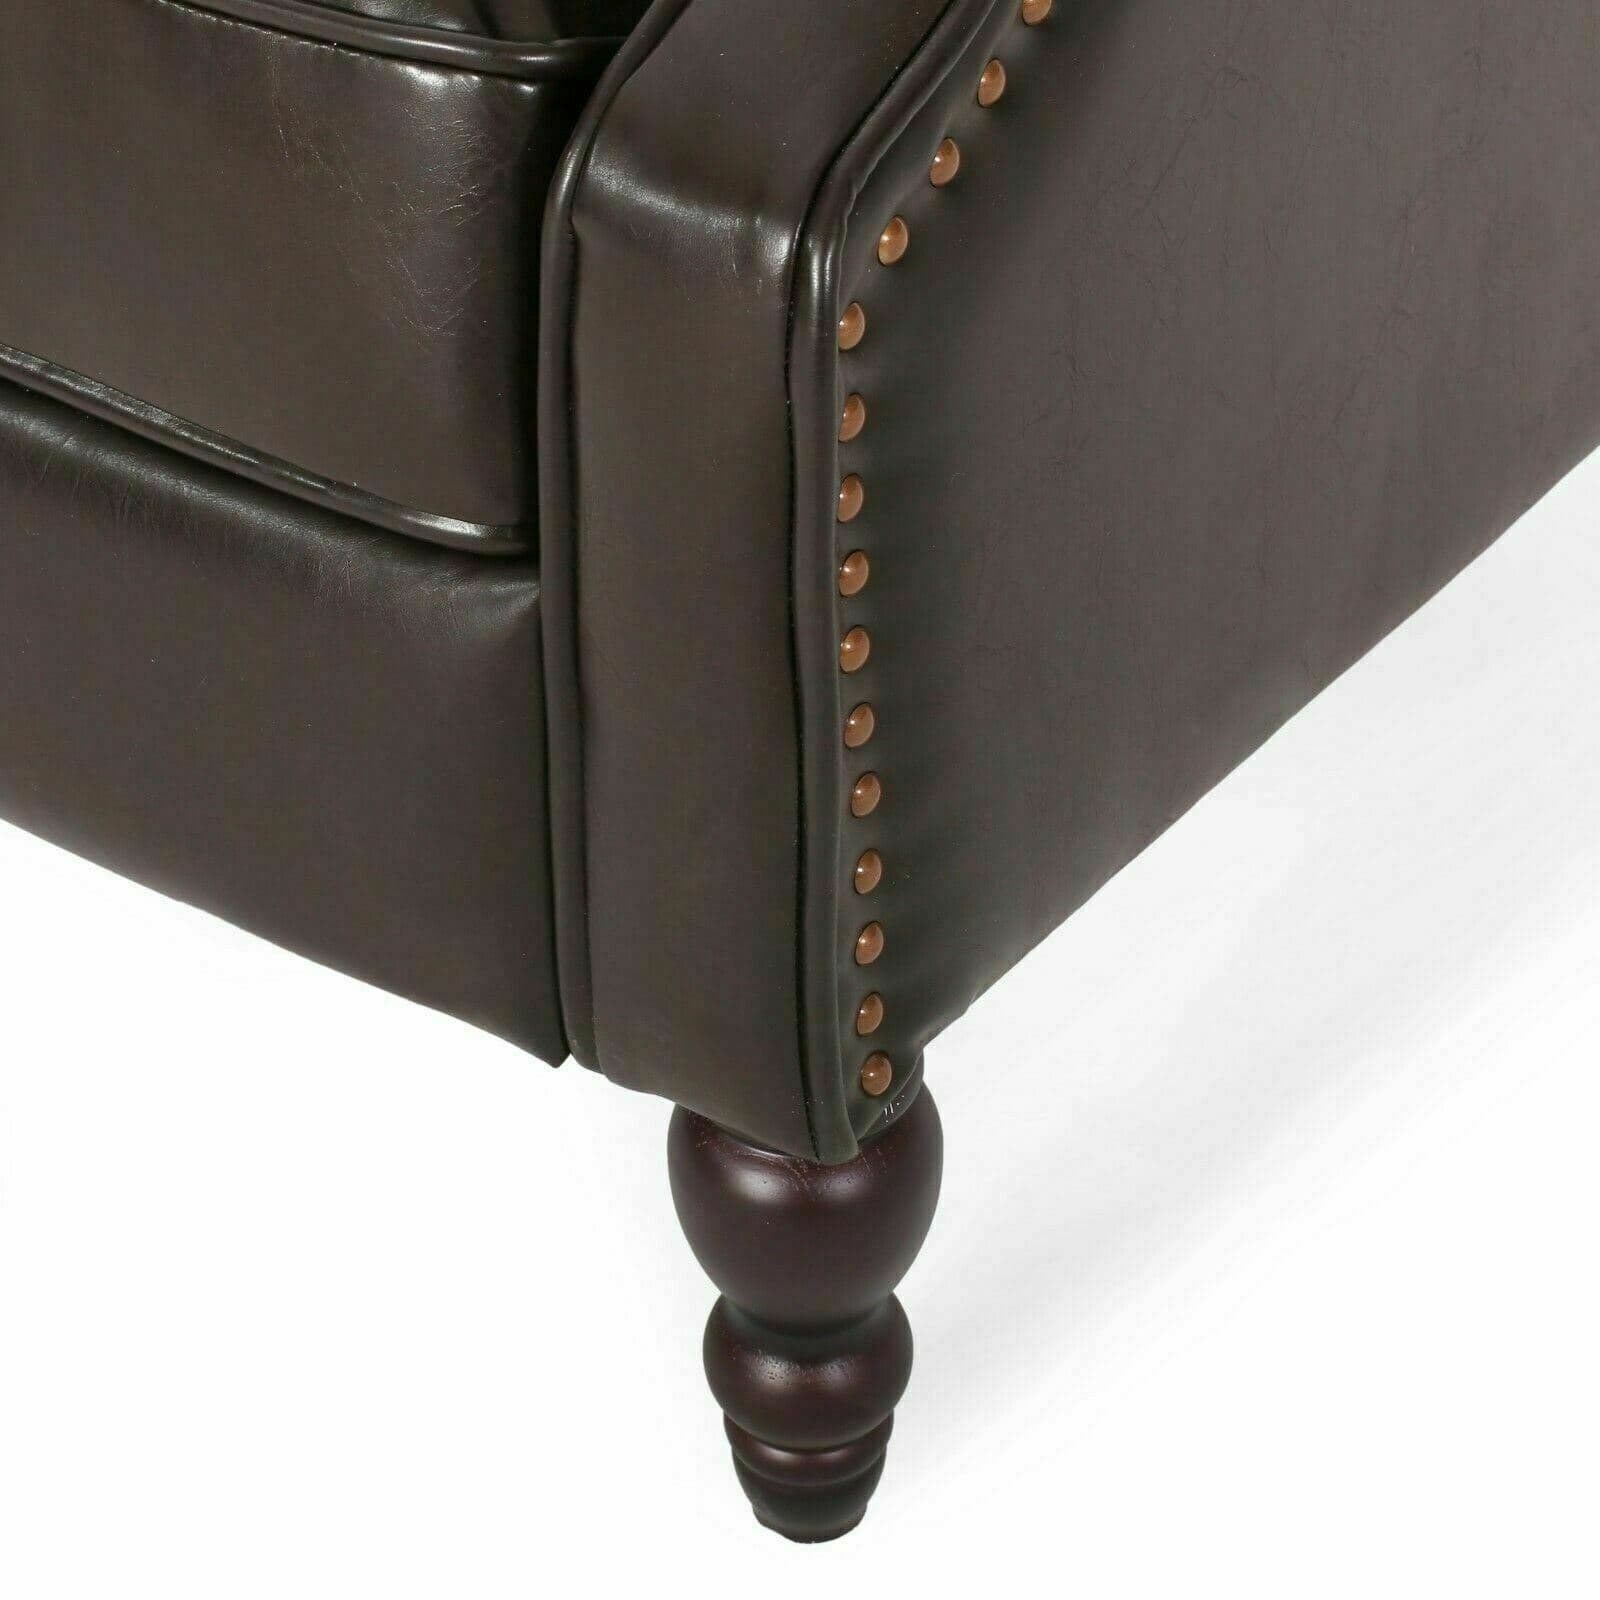 A brown leather chair with studding on the legs.